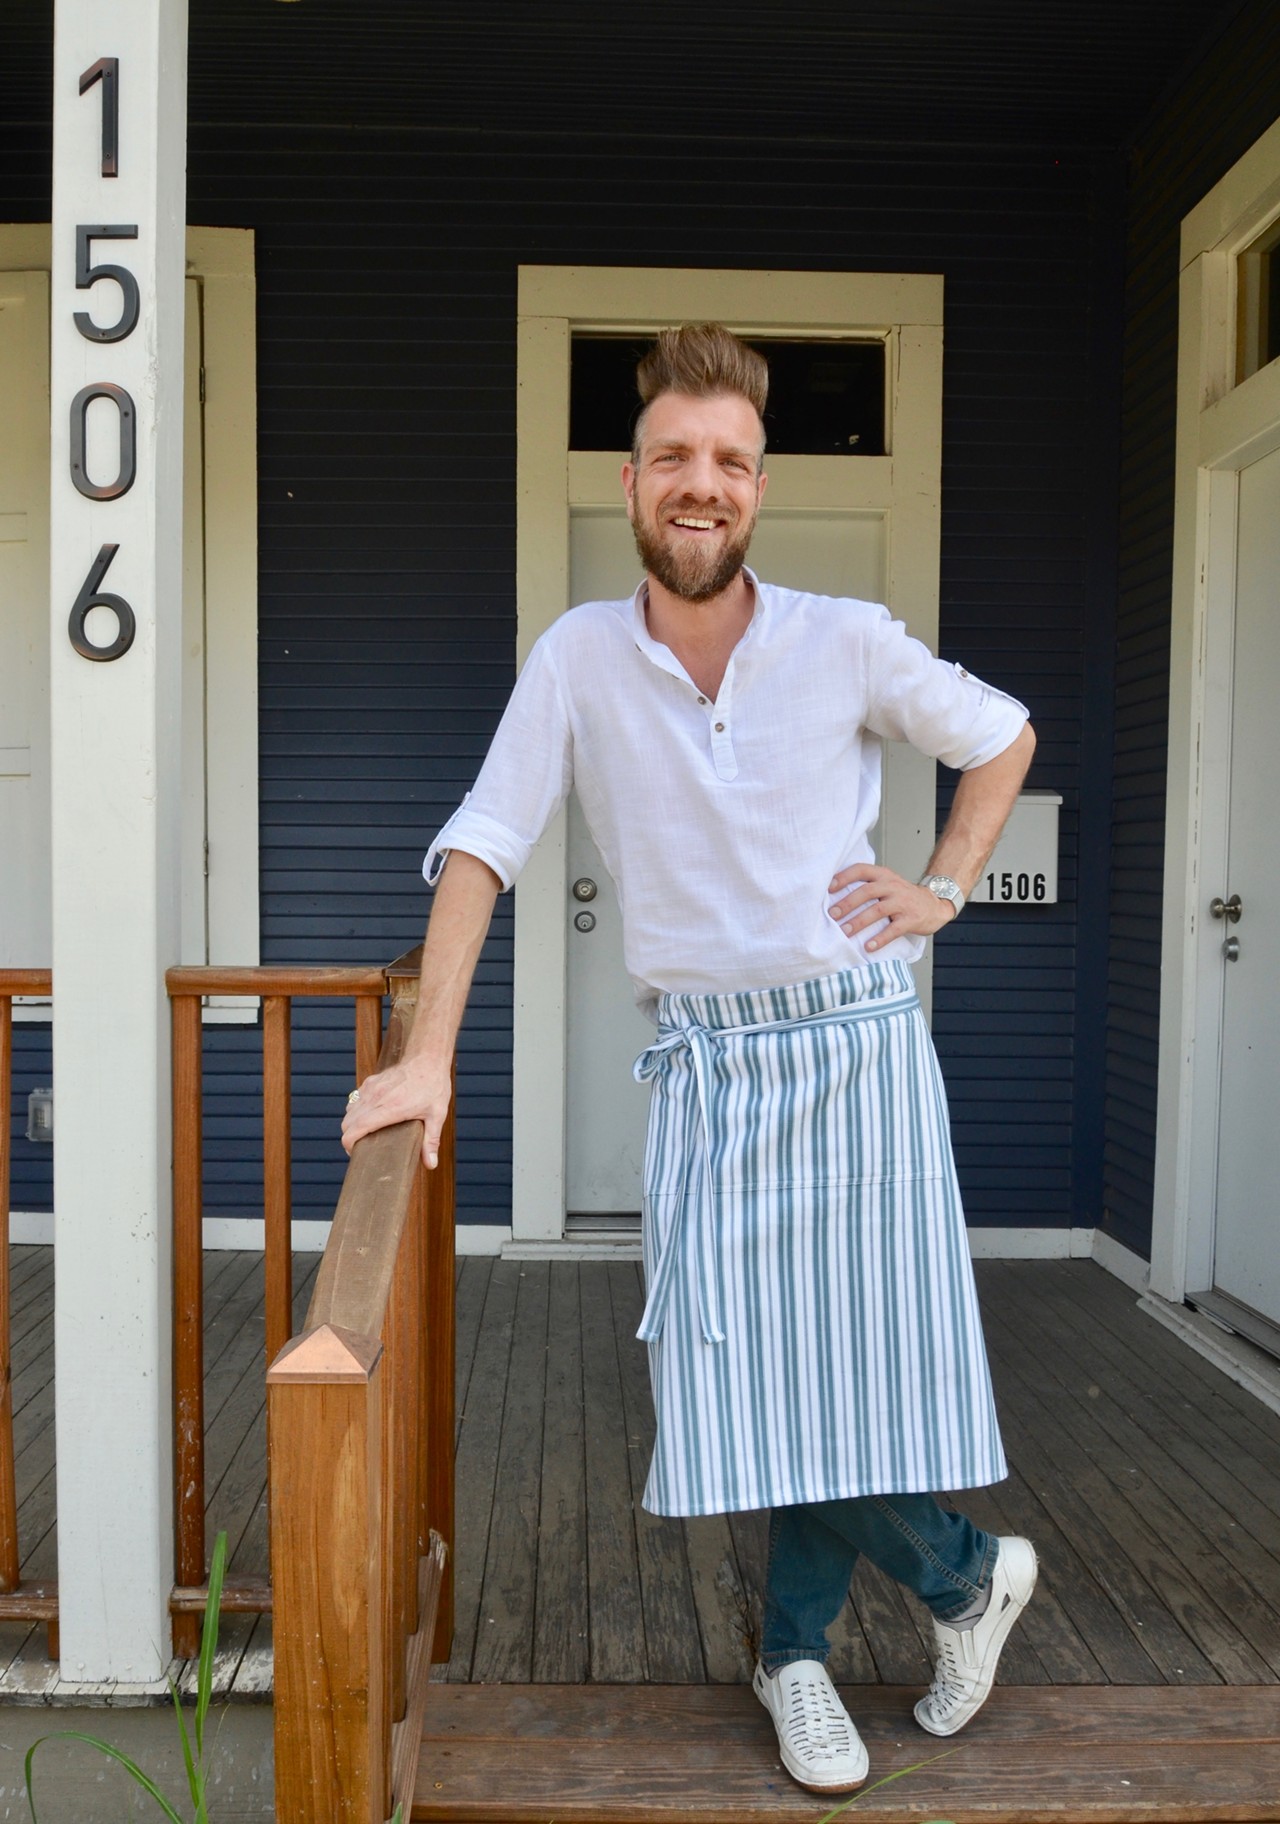 Manger Benjamin Krick poses outside Pastiche, a new East Side San Antonio bar slated to open on Friday, Sept. 13, 2019.